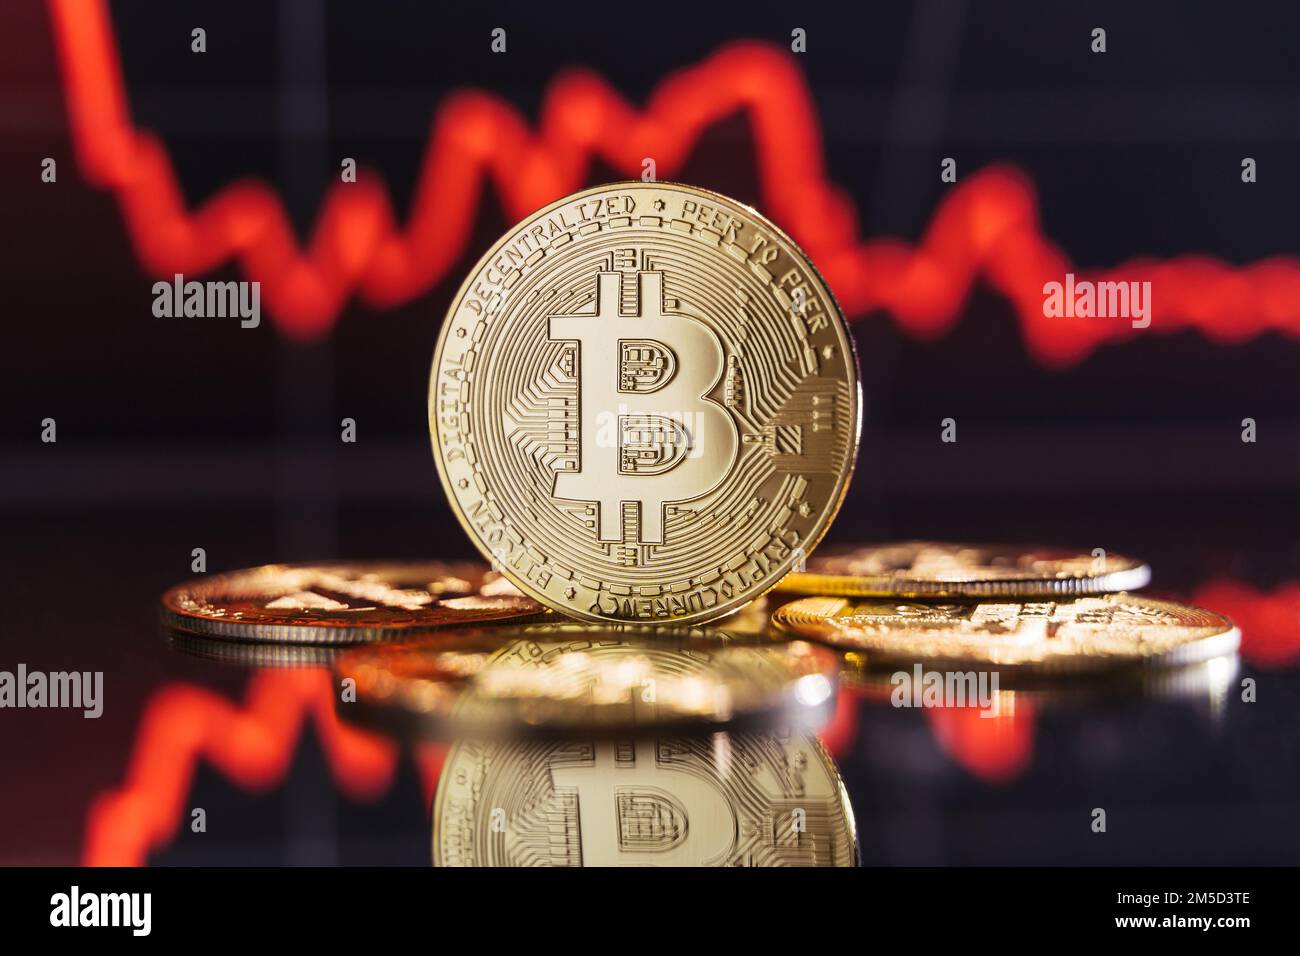 Global recession. Financial crisis. Image of golden bitcoin rising among piles of other crypto coins on digital background of chart with sole thick red line representing crash of crypto trading market Stock Photo